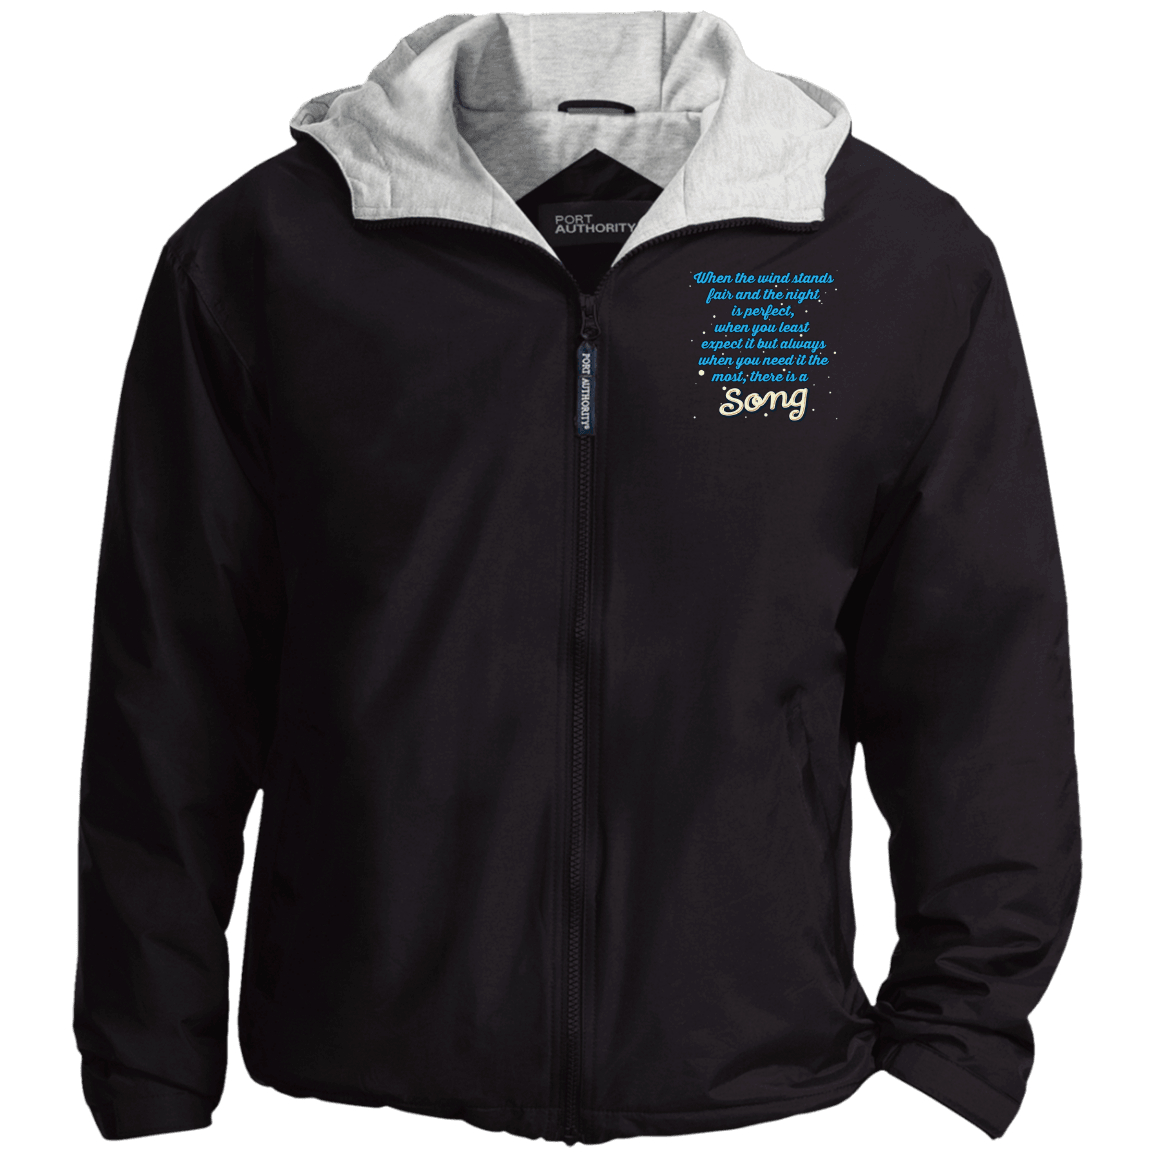 Designs by MyUtopia Shout Out:When you Need it the Most There Is A Song Embroidered Team Jacket,X-Small / Black/Light Oxford,Jackets